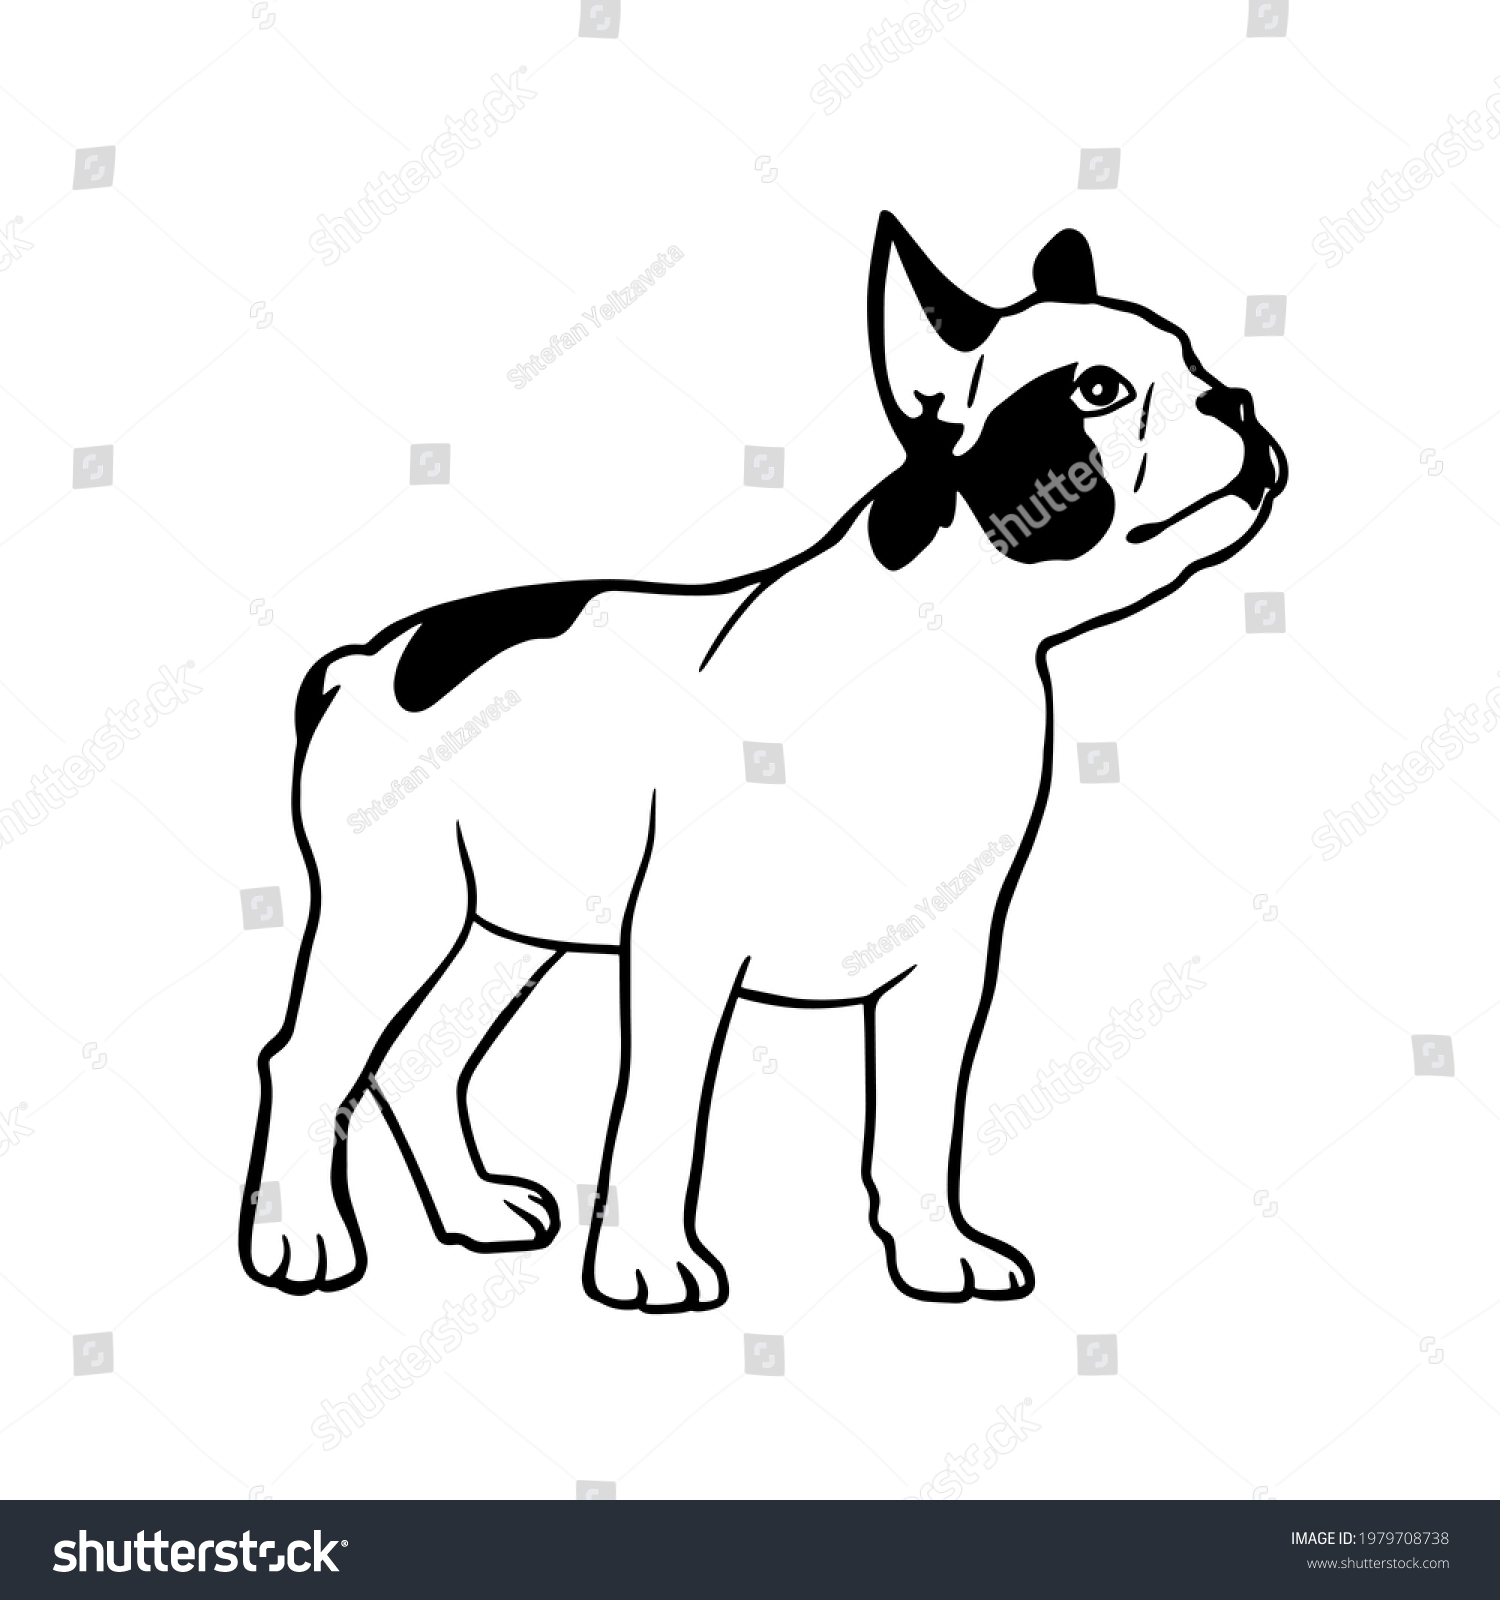 SVG of french bulldog pappy in graphic style. Creative illustrations
Clipart file for cutting vinyl decal and printing svg